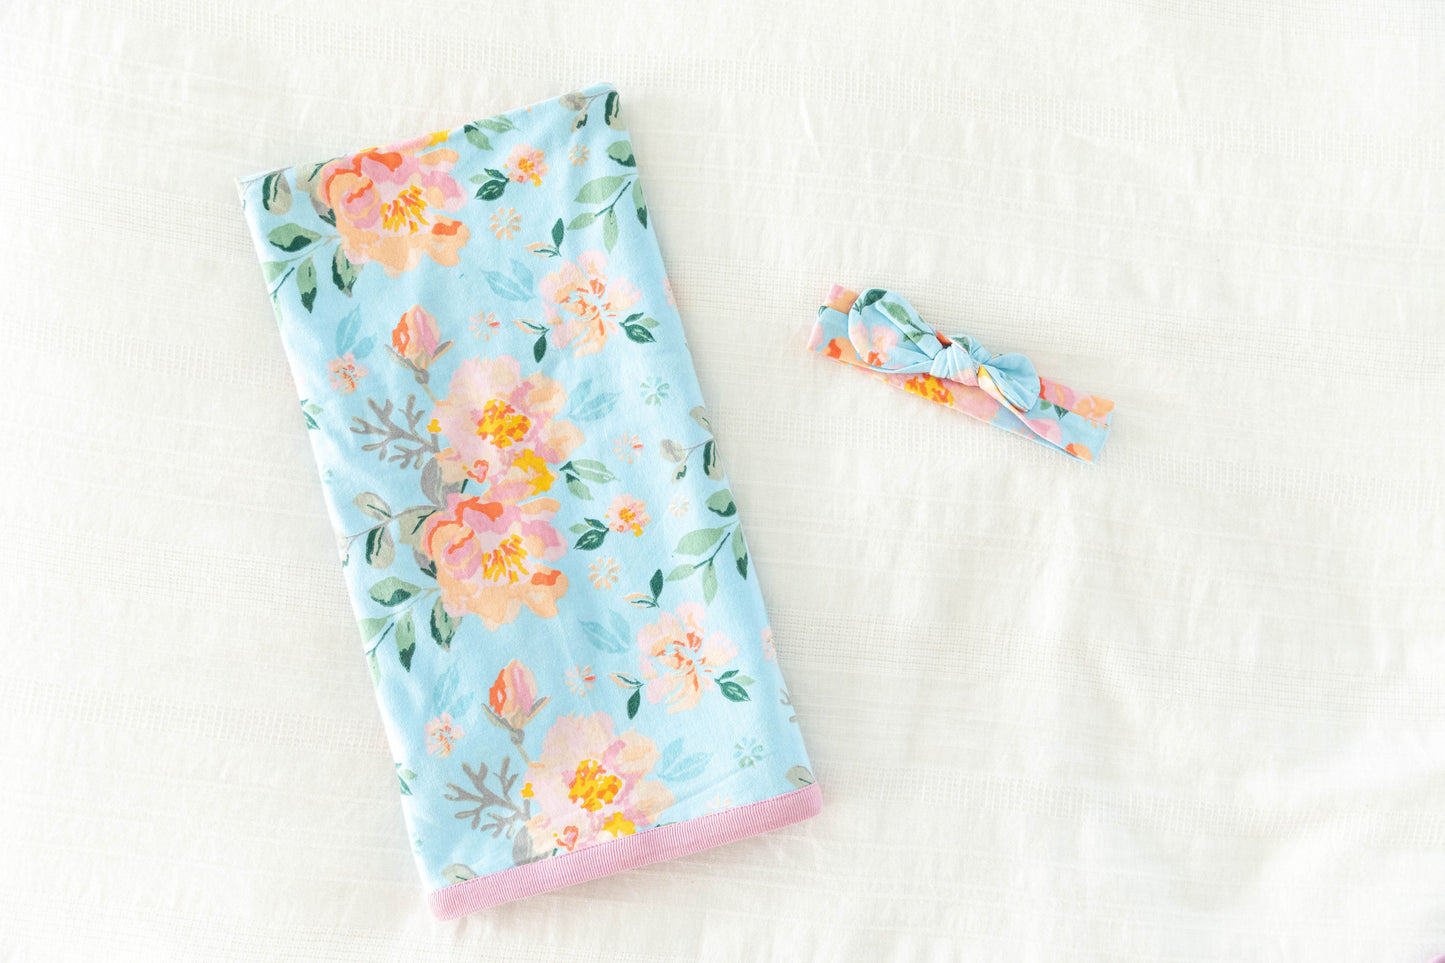 Jade is a colorful flowered print. Swaddle your newborn in Jade for a heavenly look. 